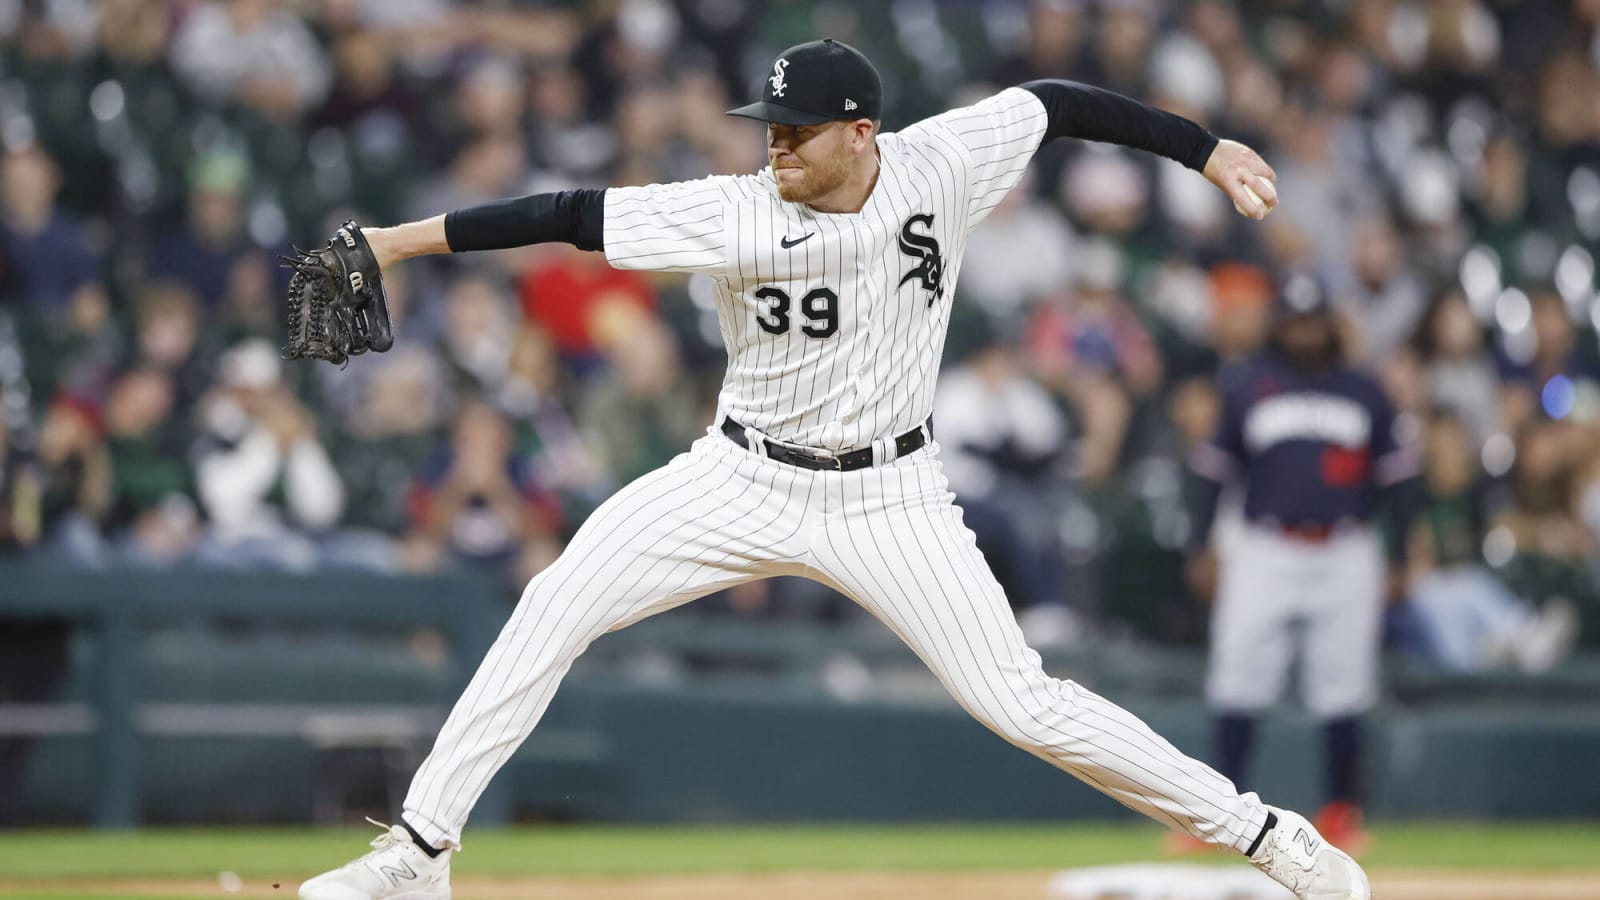 White Sox series preview: Can these teams bounce back? - Royals Review